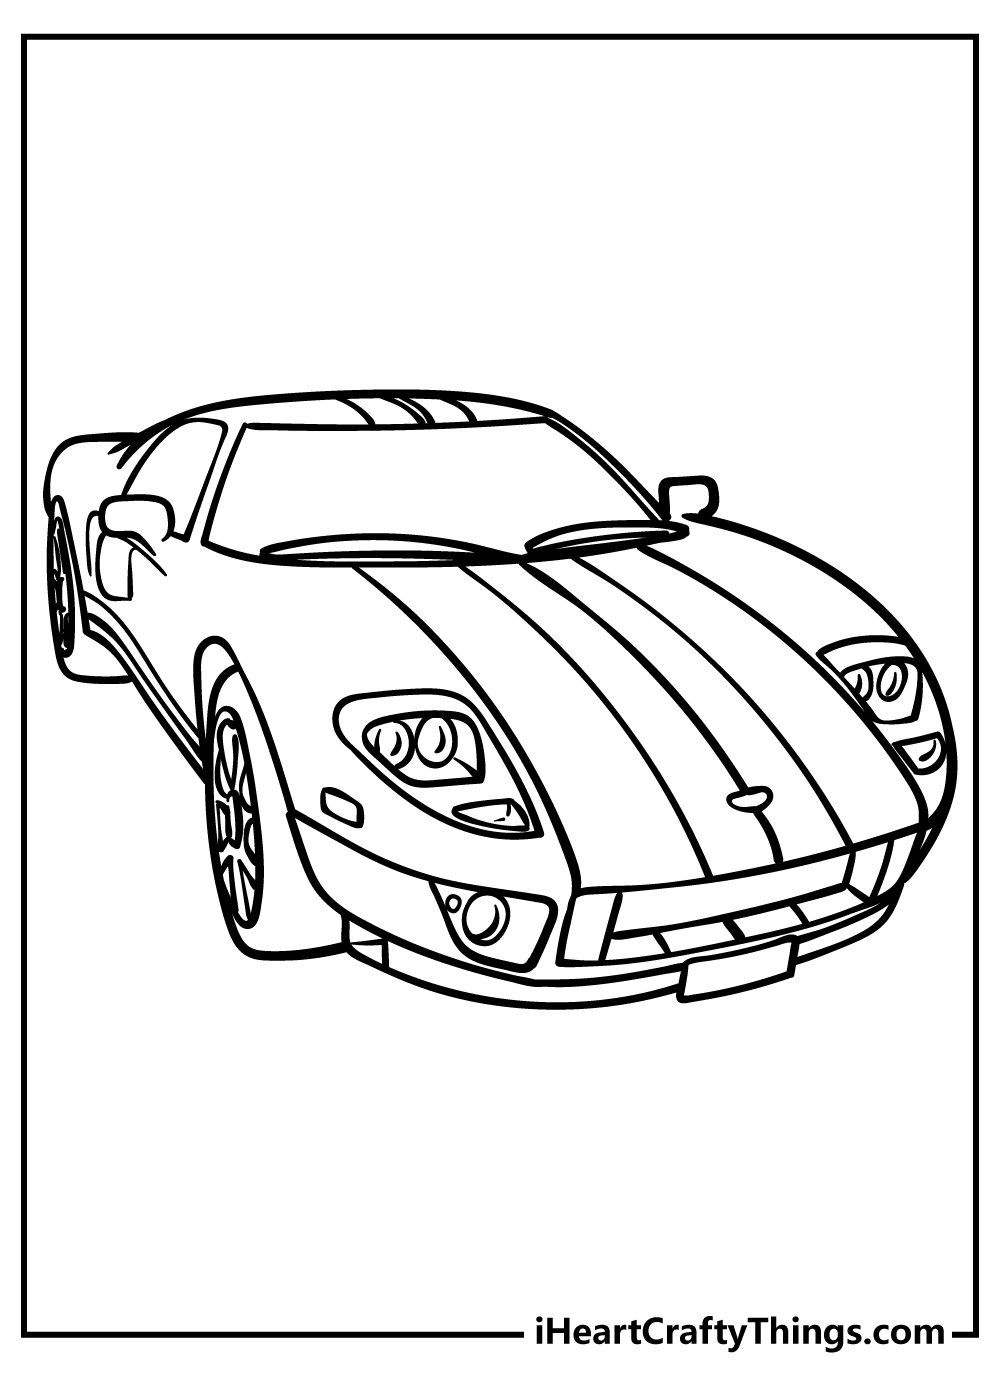 Race Car Coloring Pages for preschoolers free printable